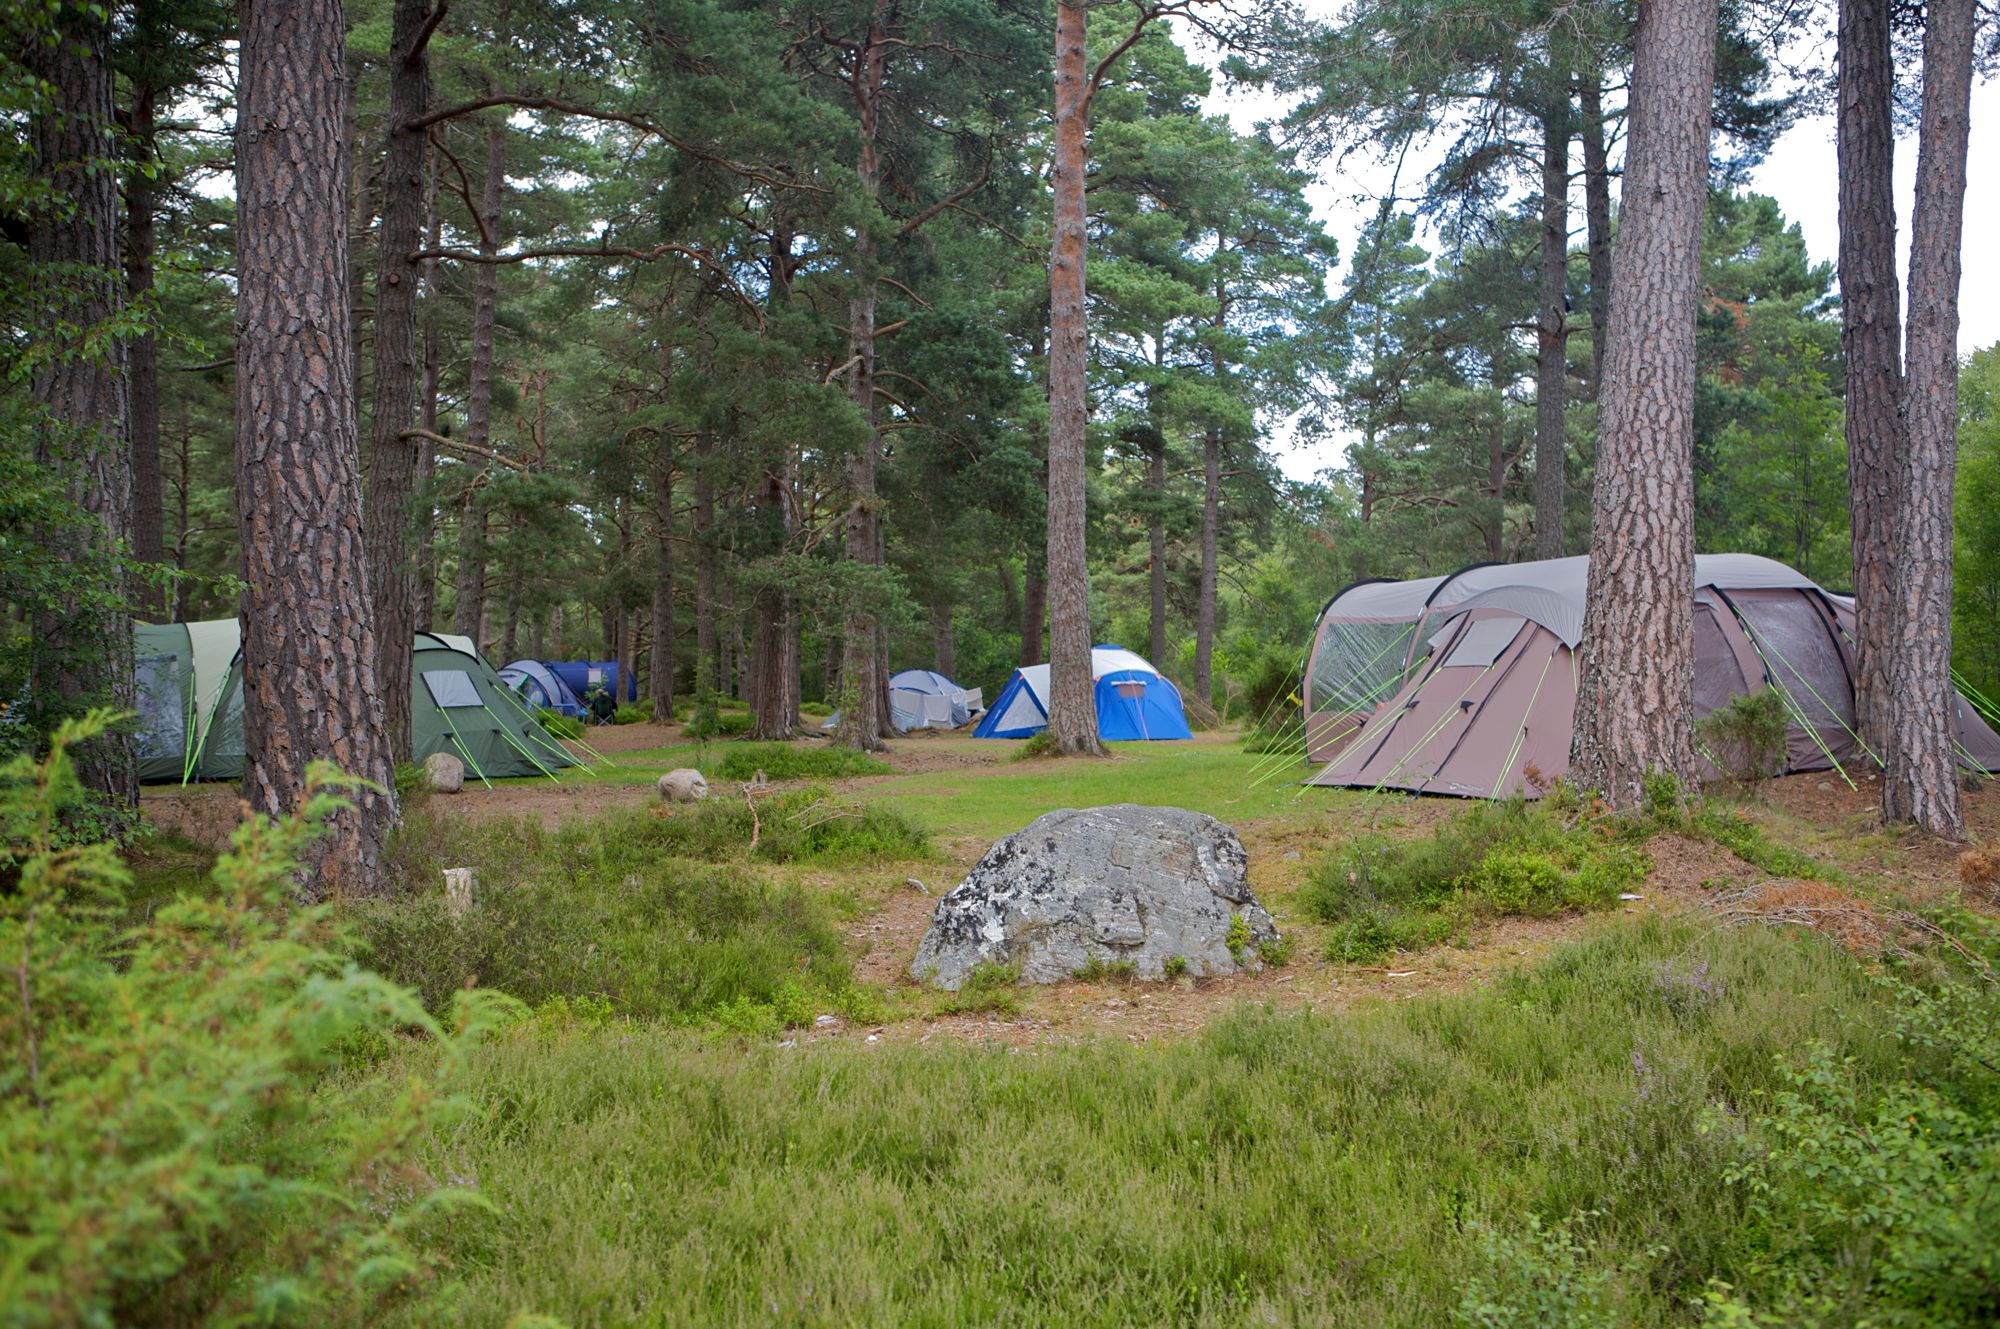 The Best Woodland Campsites – Camping in the trees and the forest